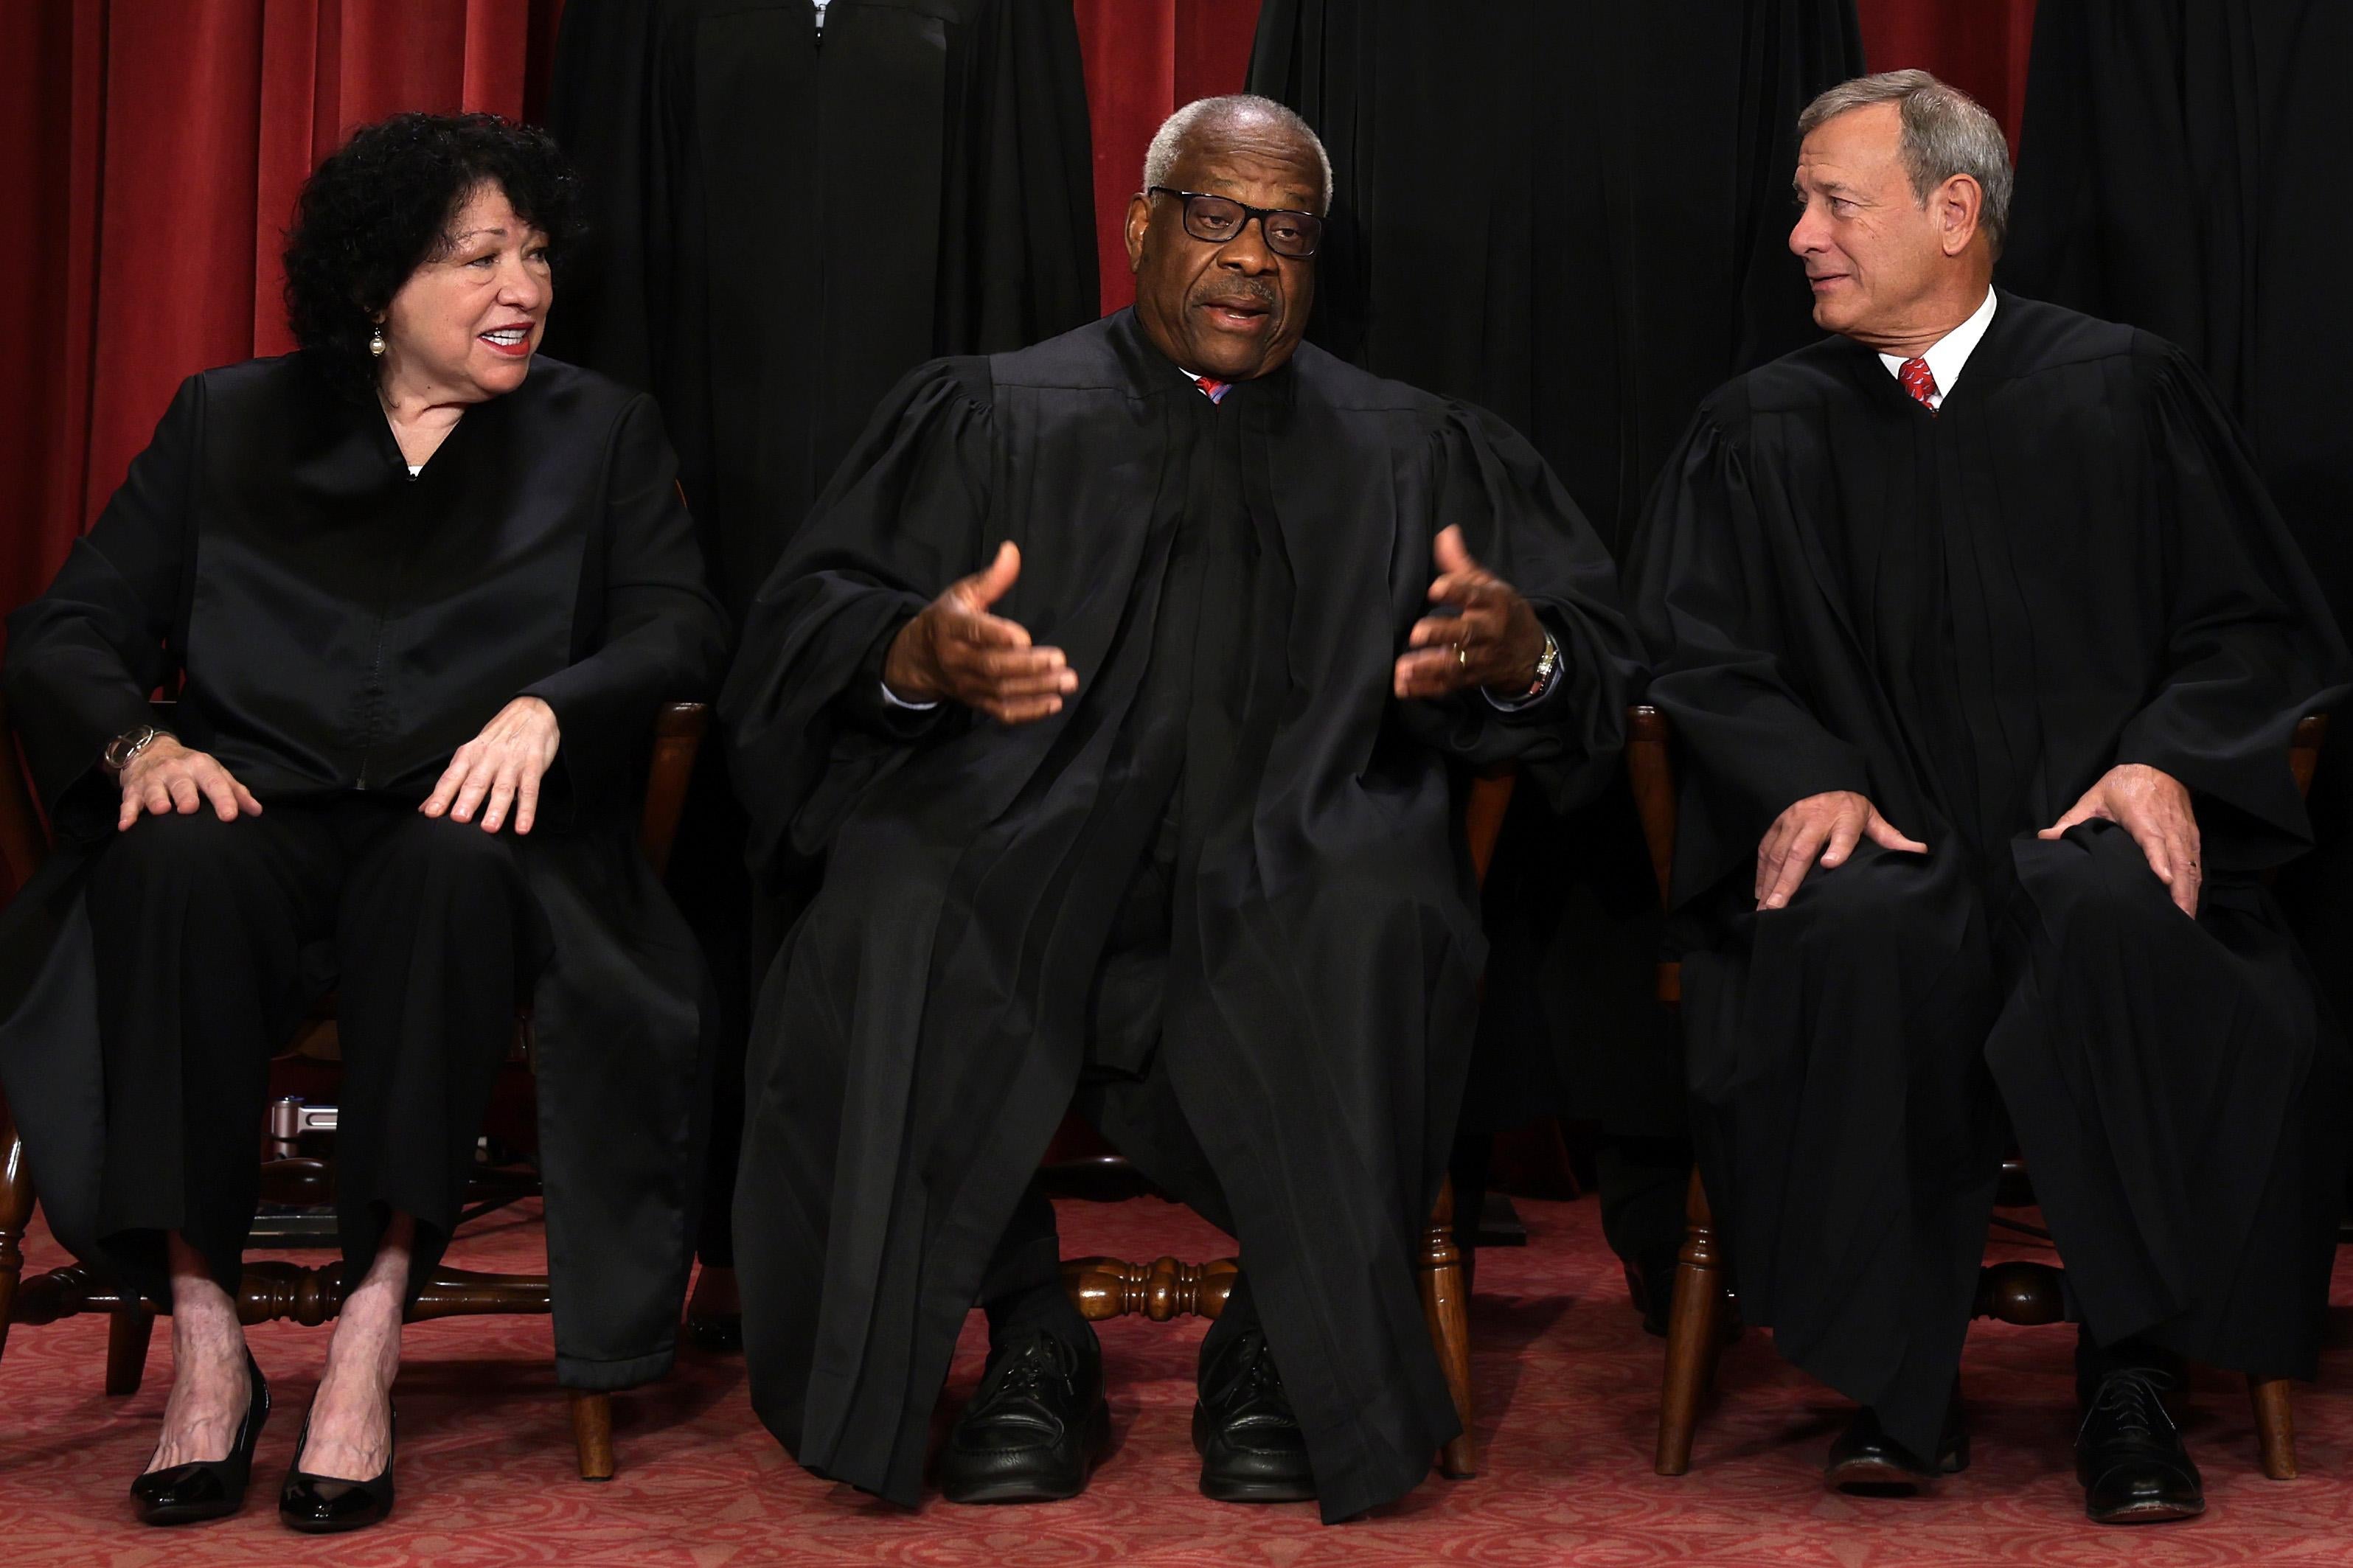 The three justices chatting in robes.